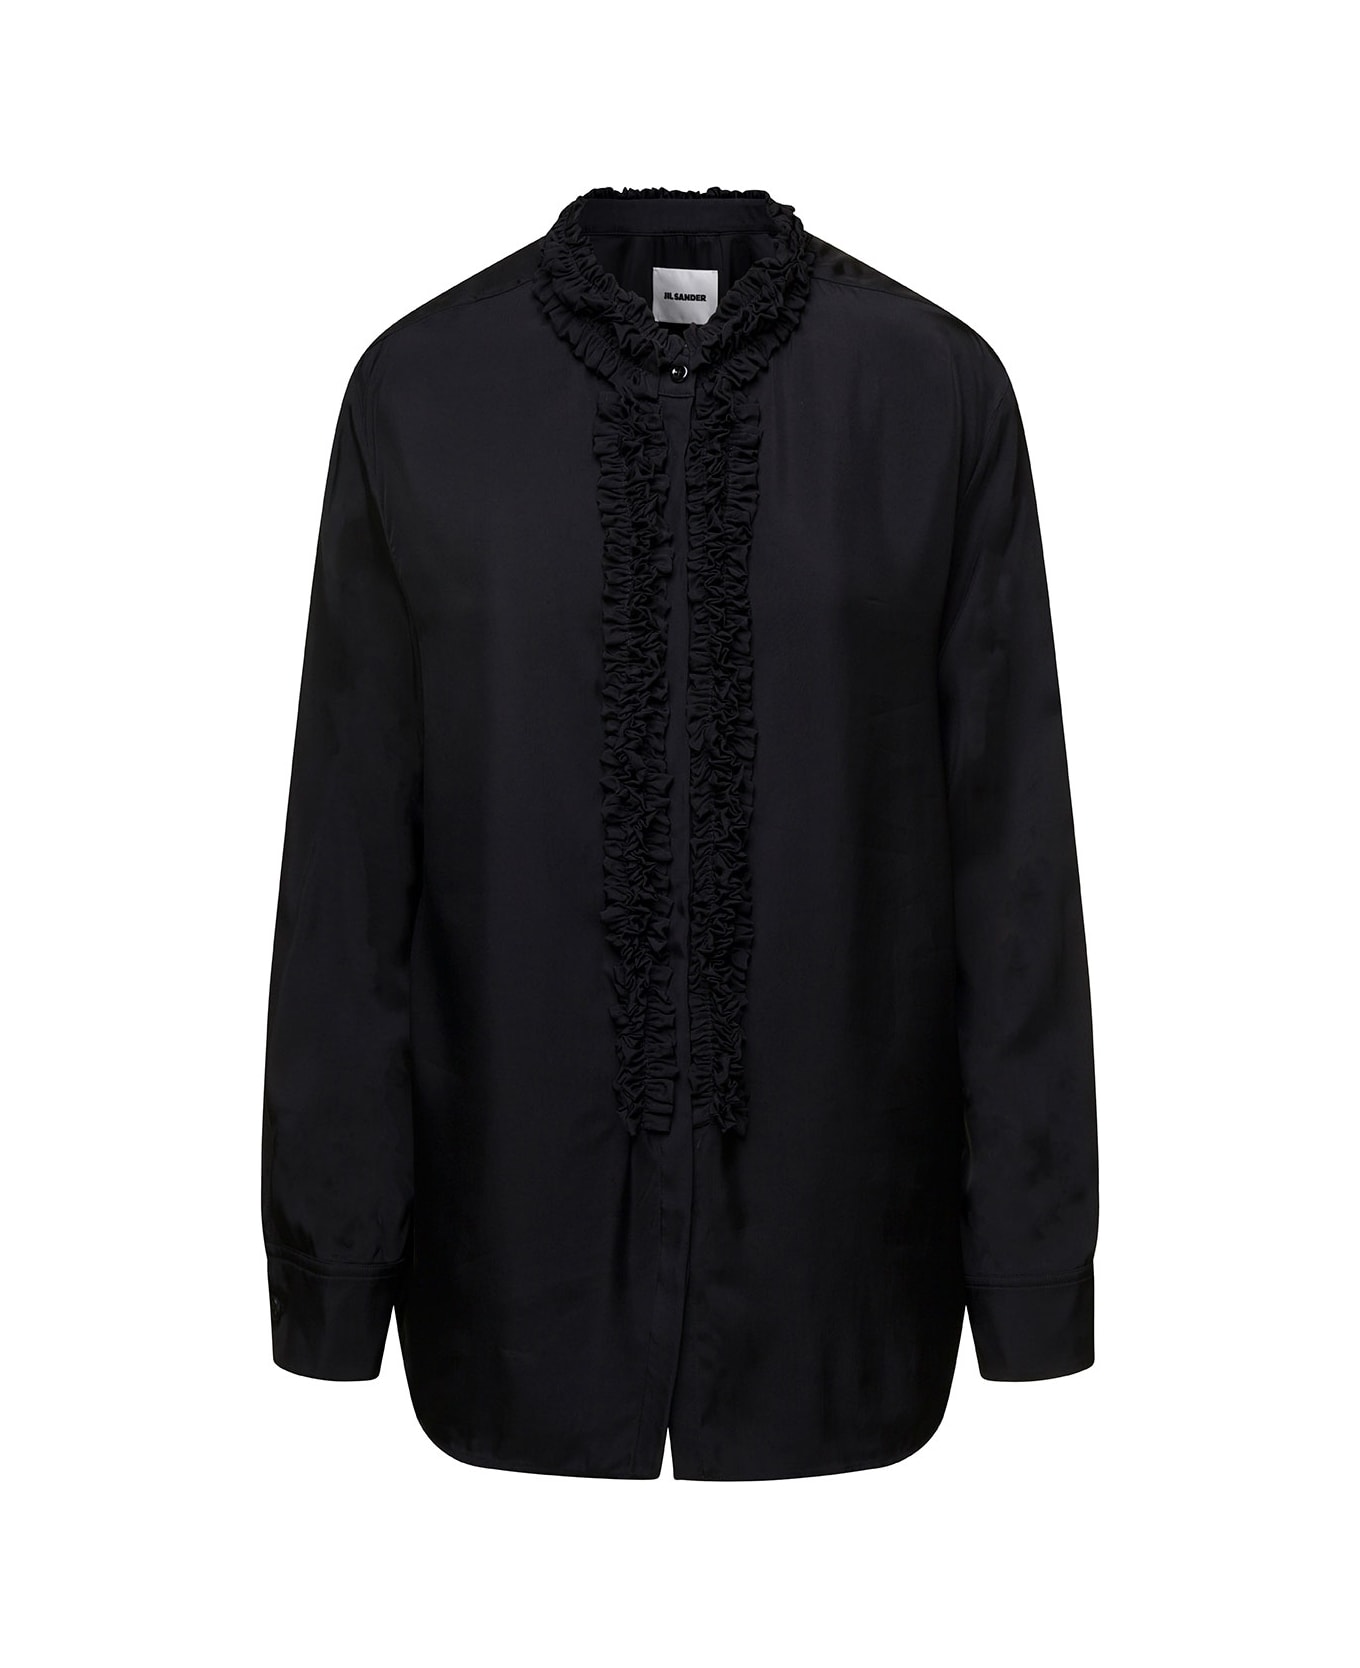 Jil Sander Black Shirt With Ruches In Viscose Woman - Black シャツ